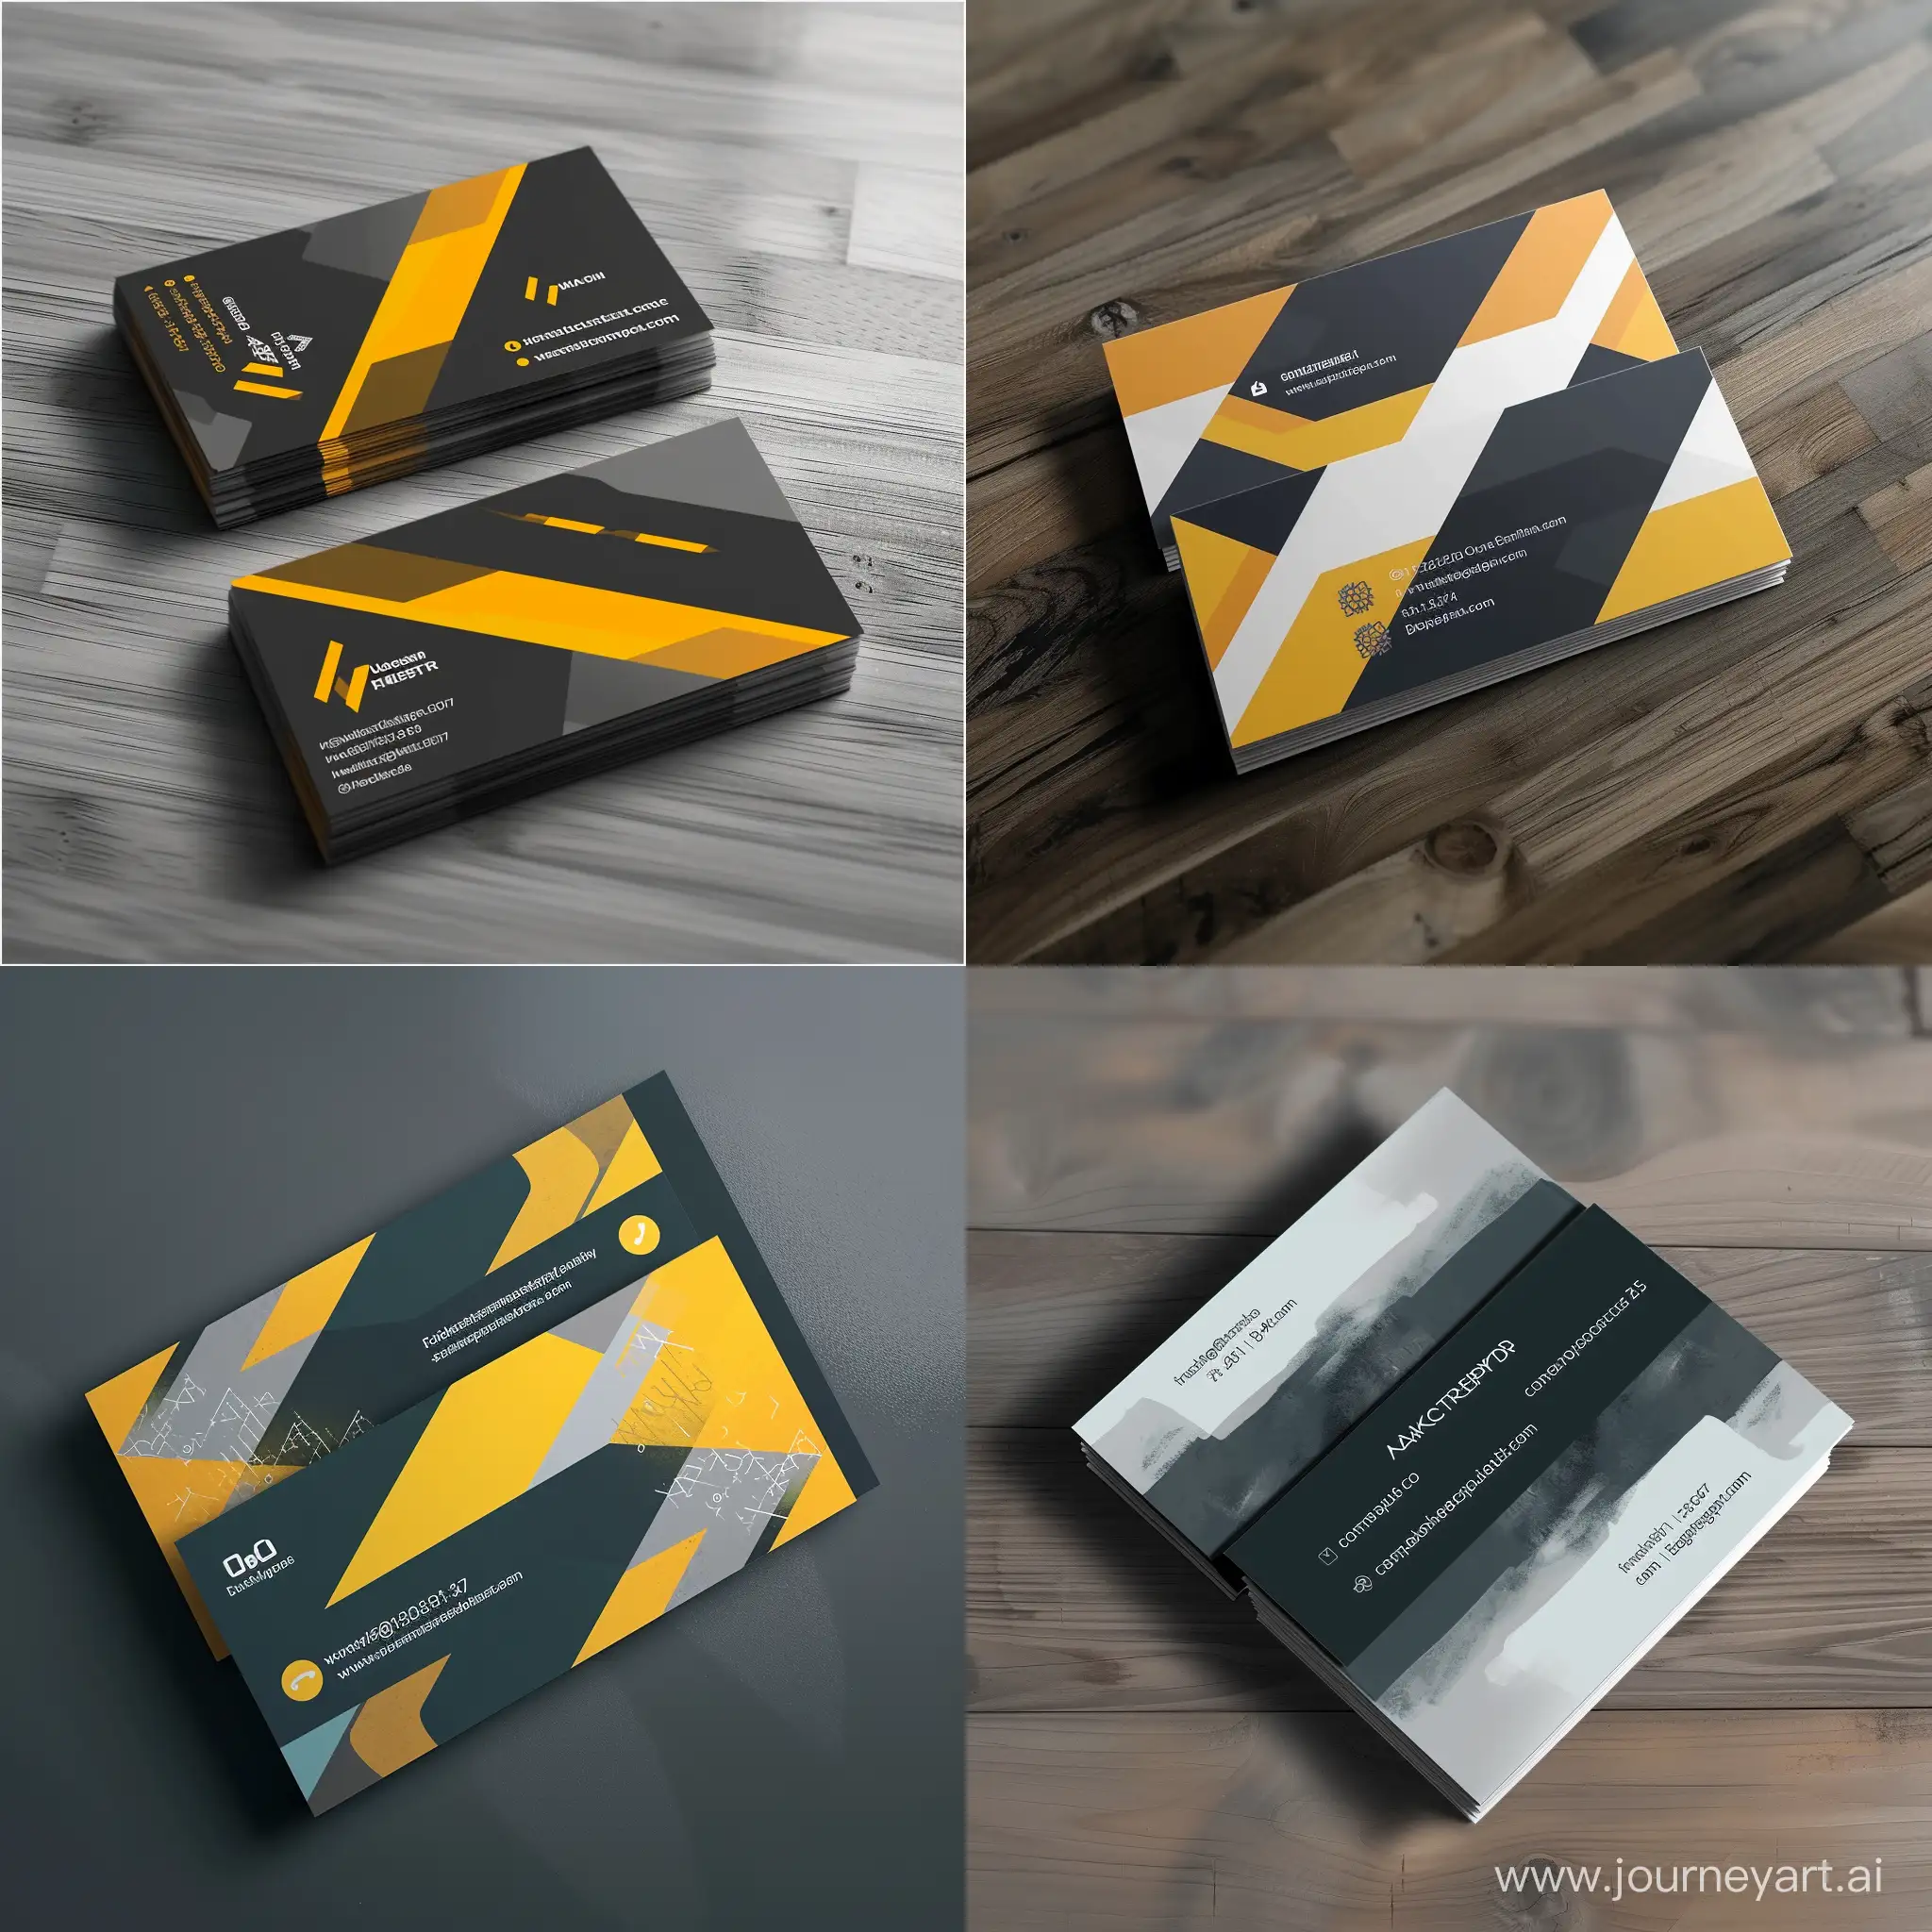 Elegant-Business-Card-Design-with-Version-6-and-11-Aspect-Ratio